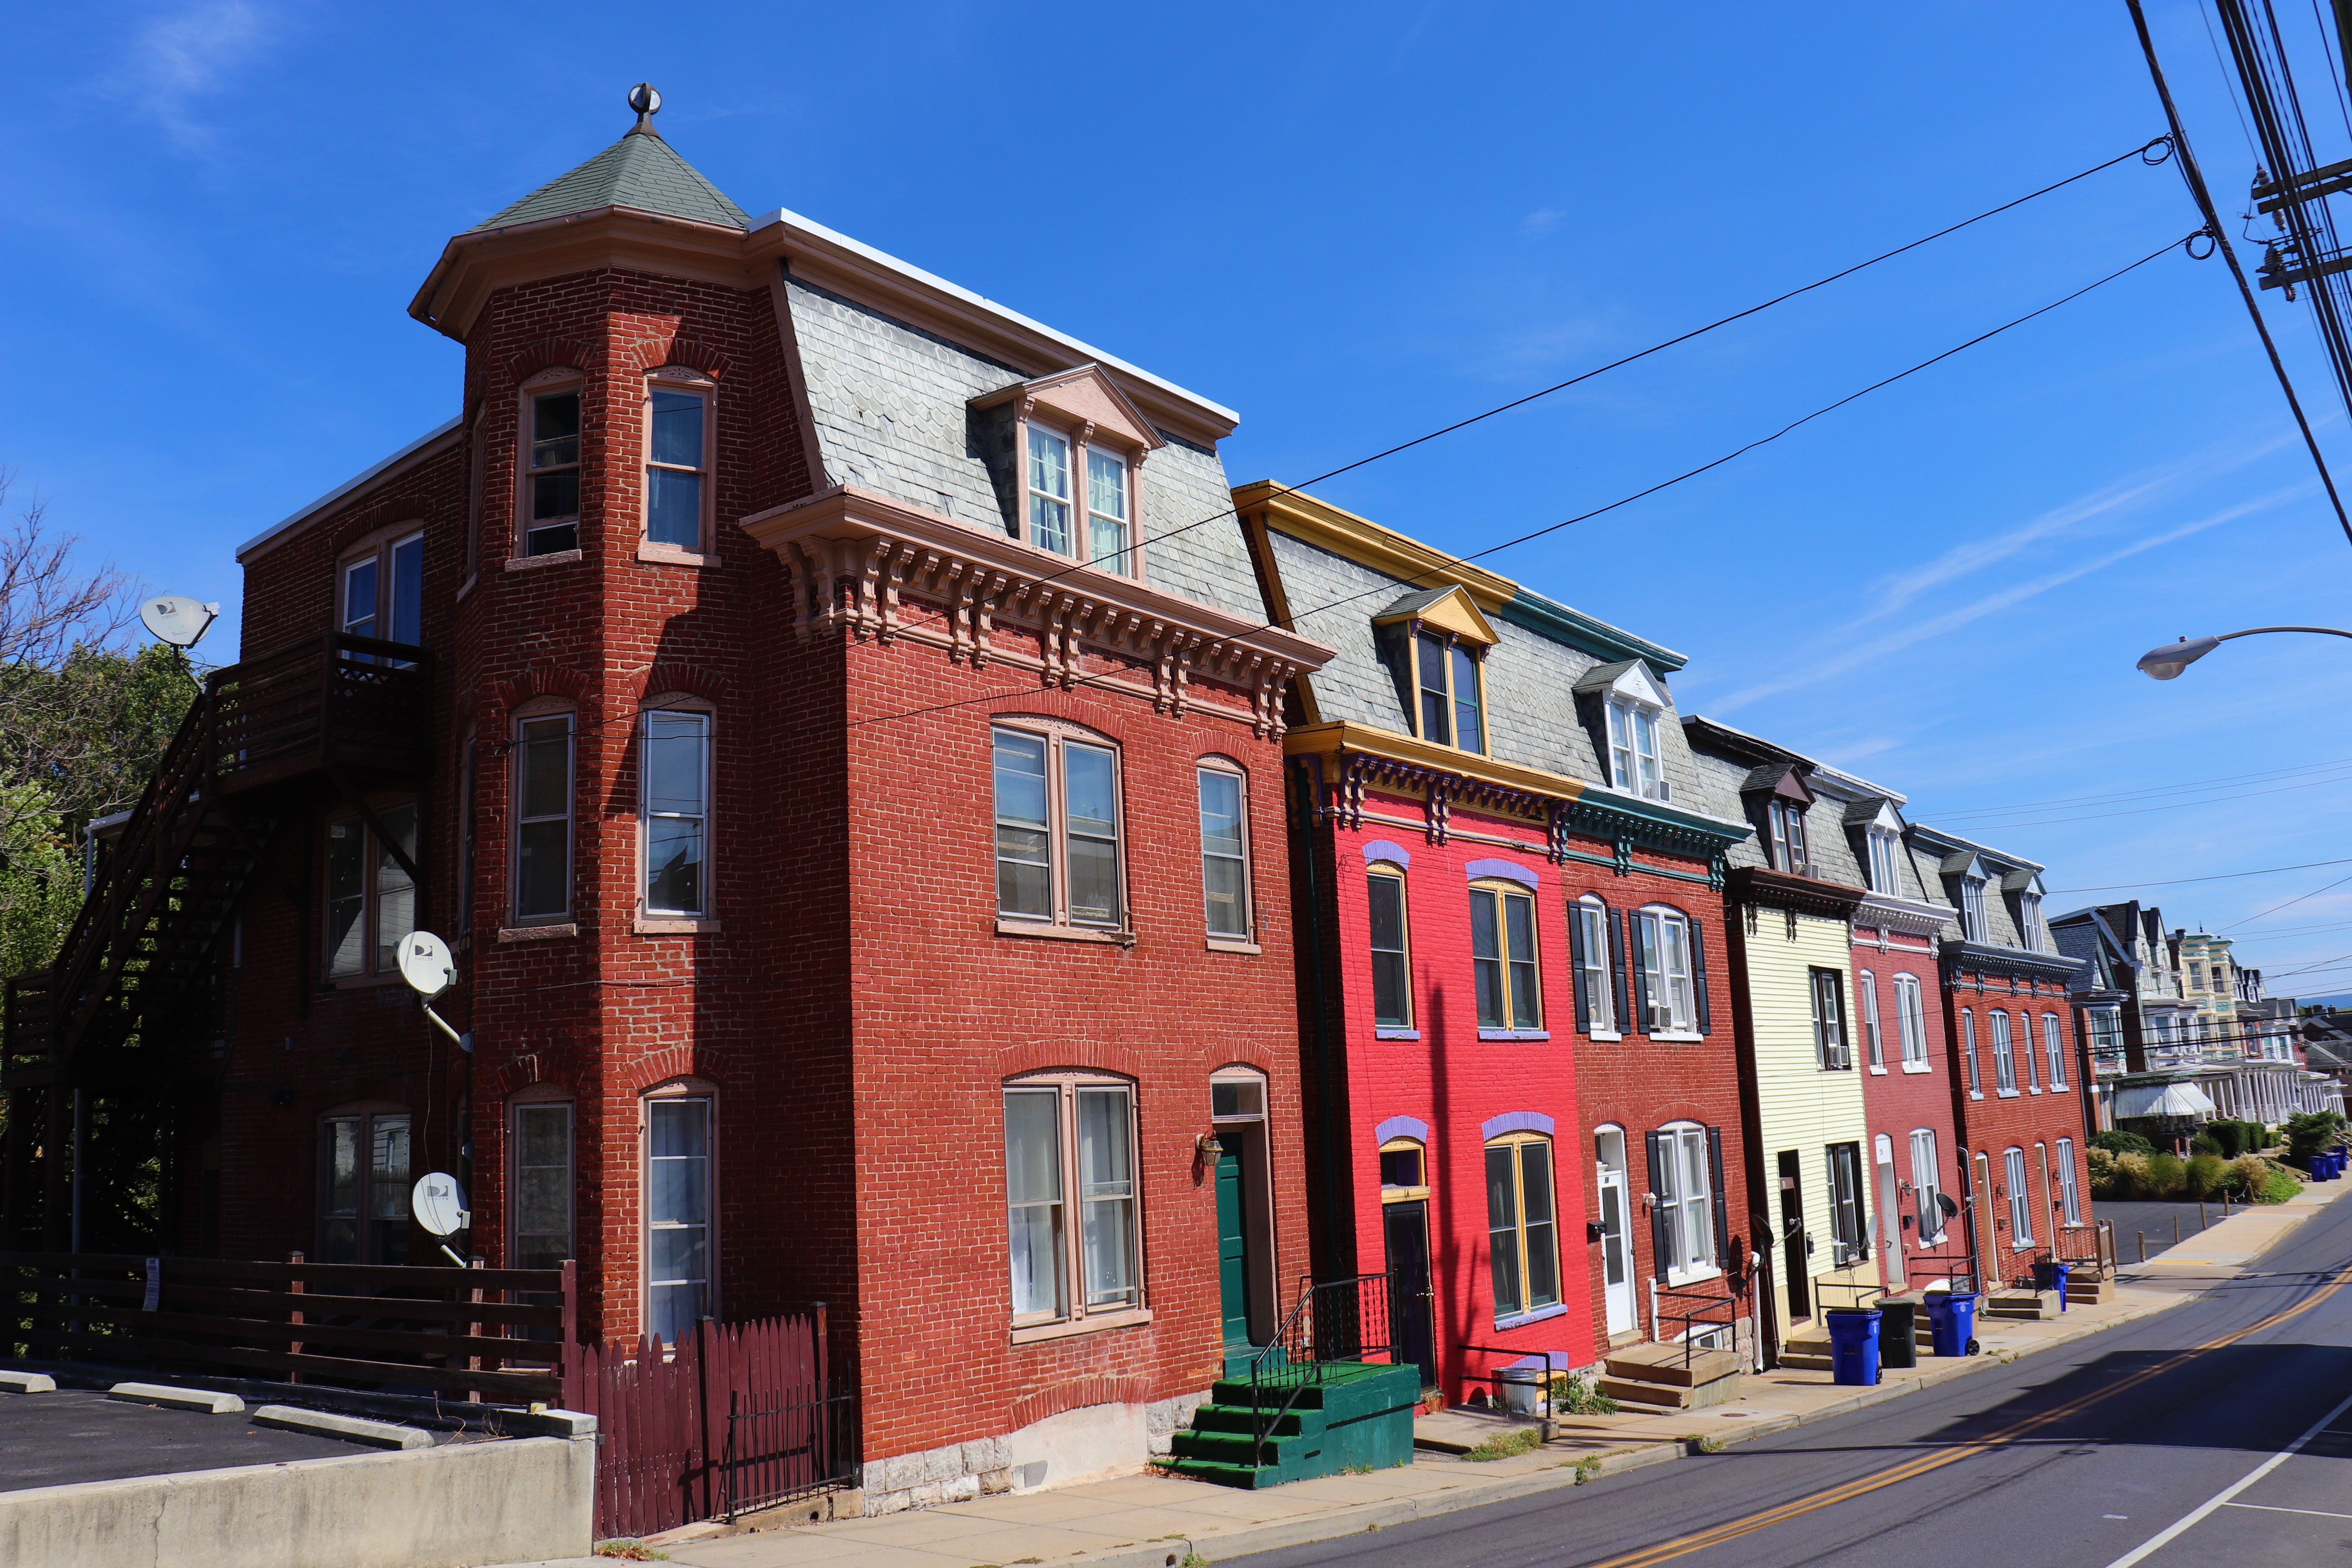 Row of townhouses in Hagerstown, Maryland